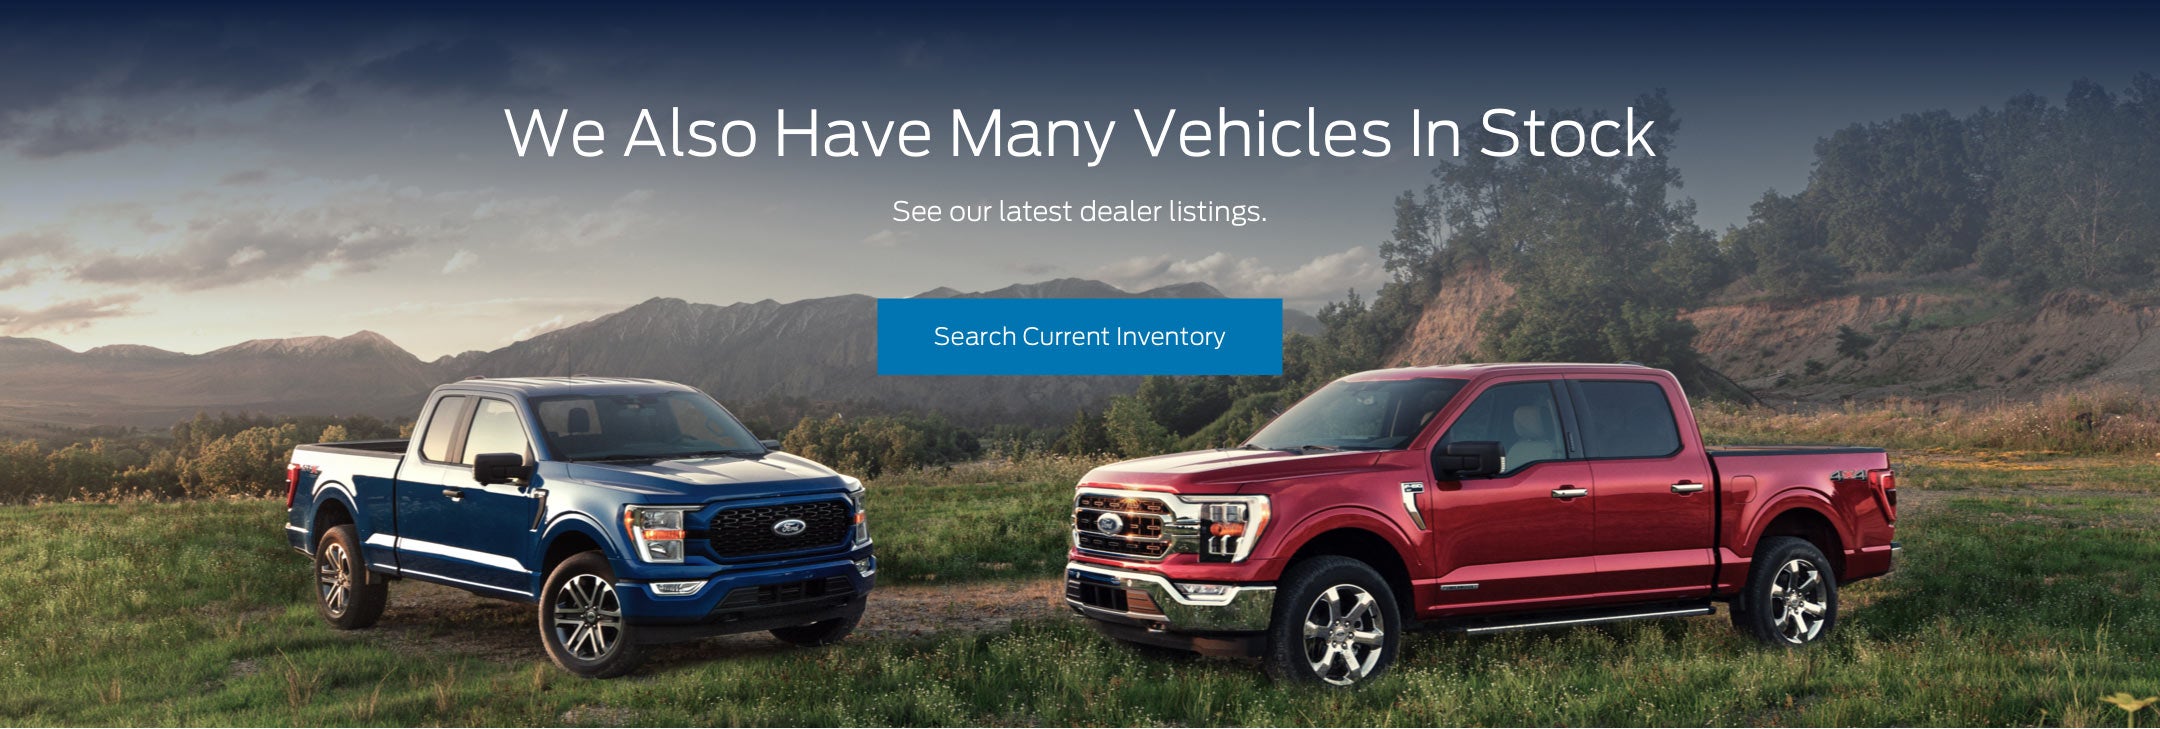 Ford vehicles in stock | Meadows Ford in Mountain View AR